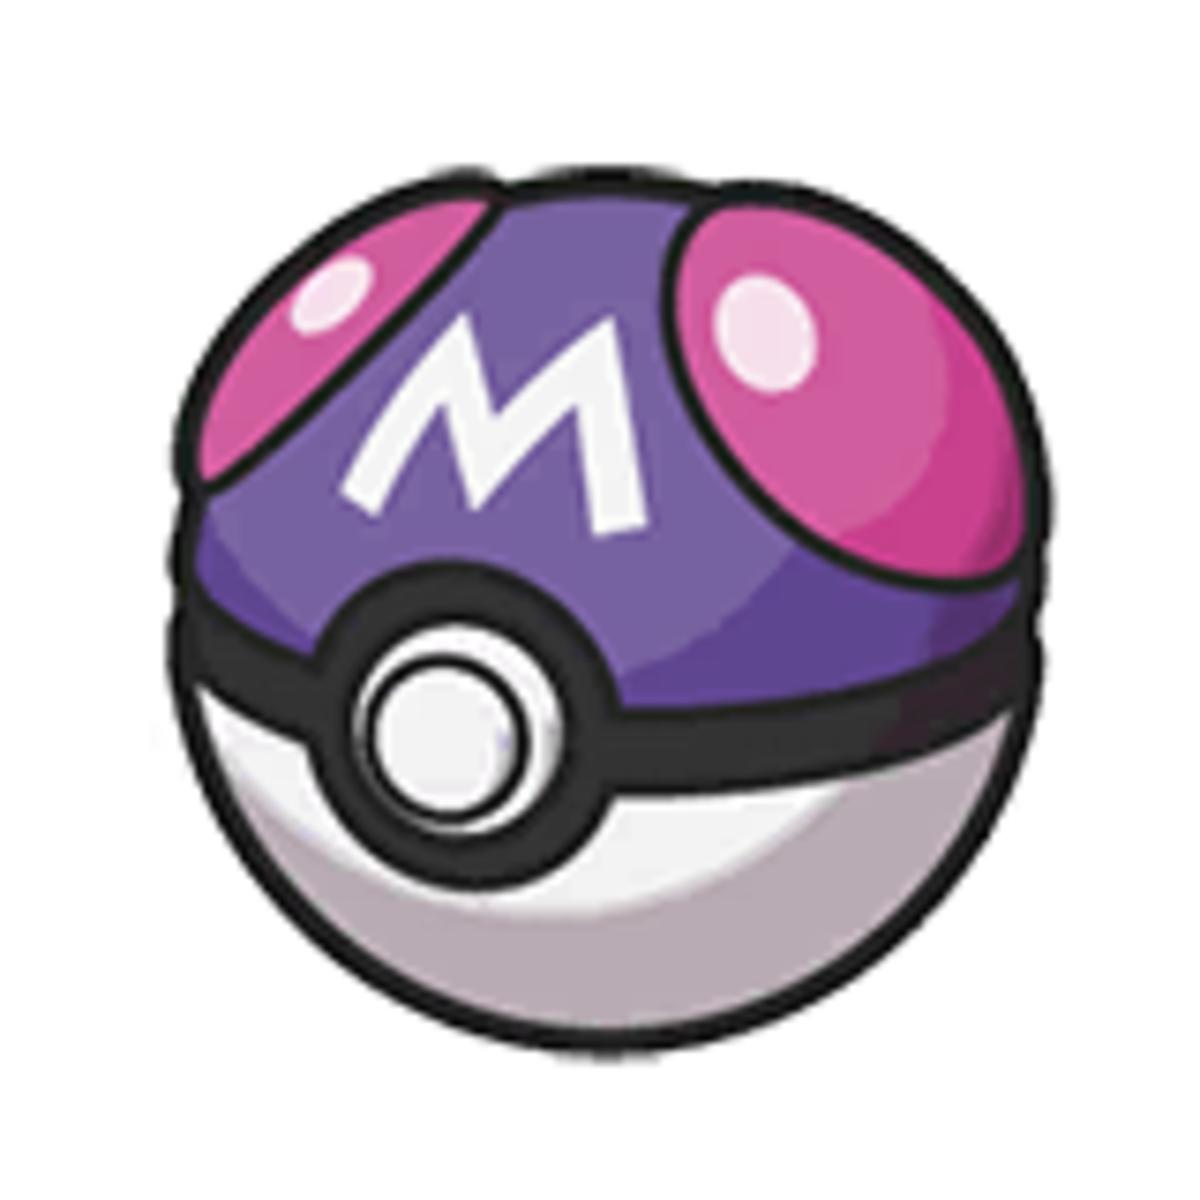 Pokemon: Every Poke Ball ranked from worst to best - Video Games